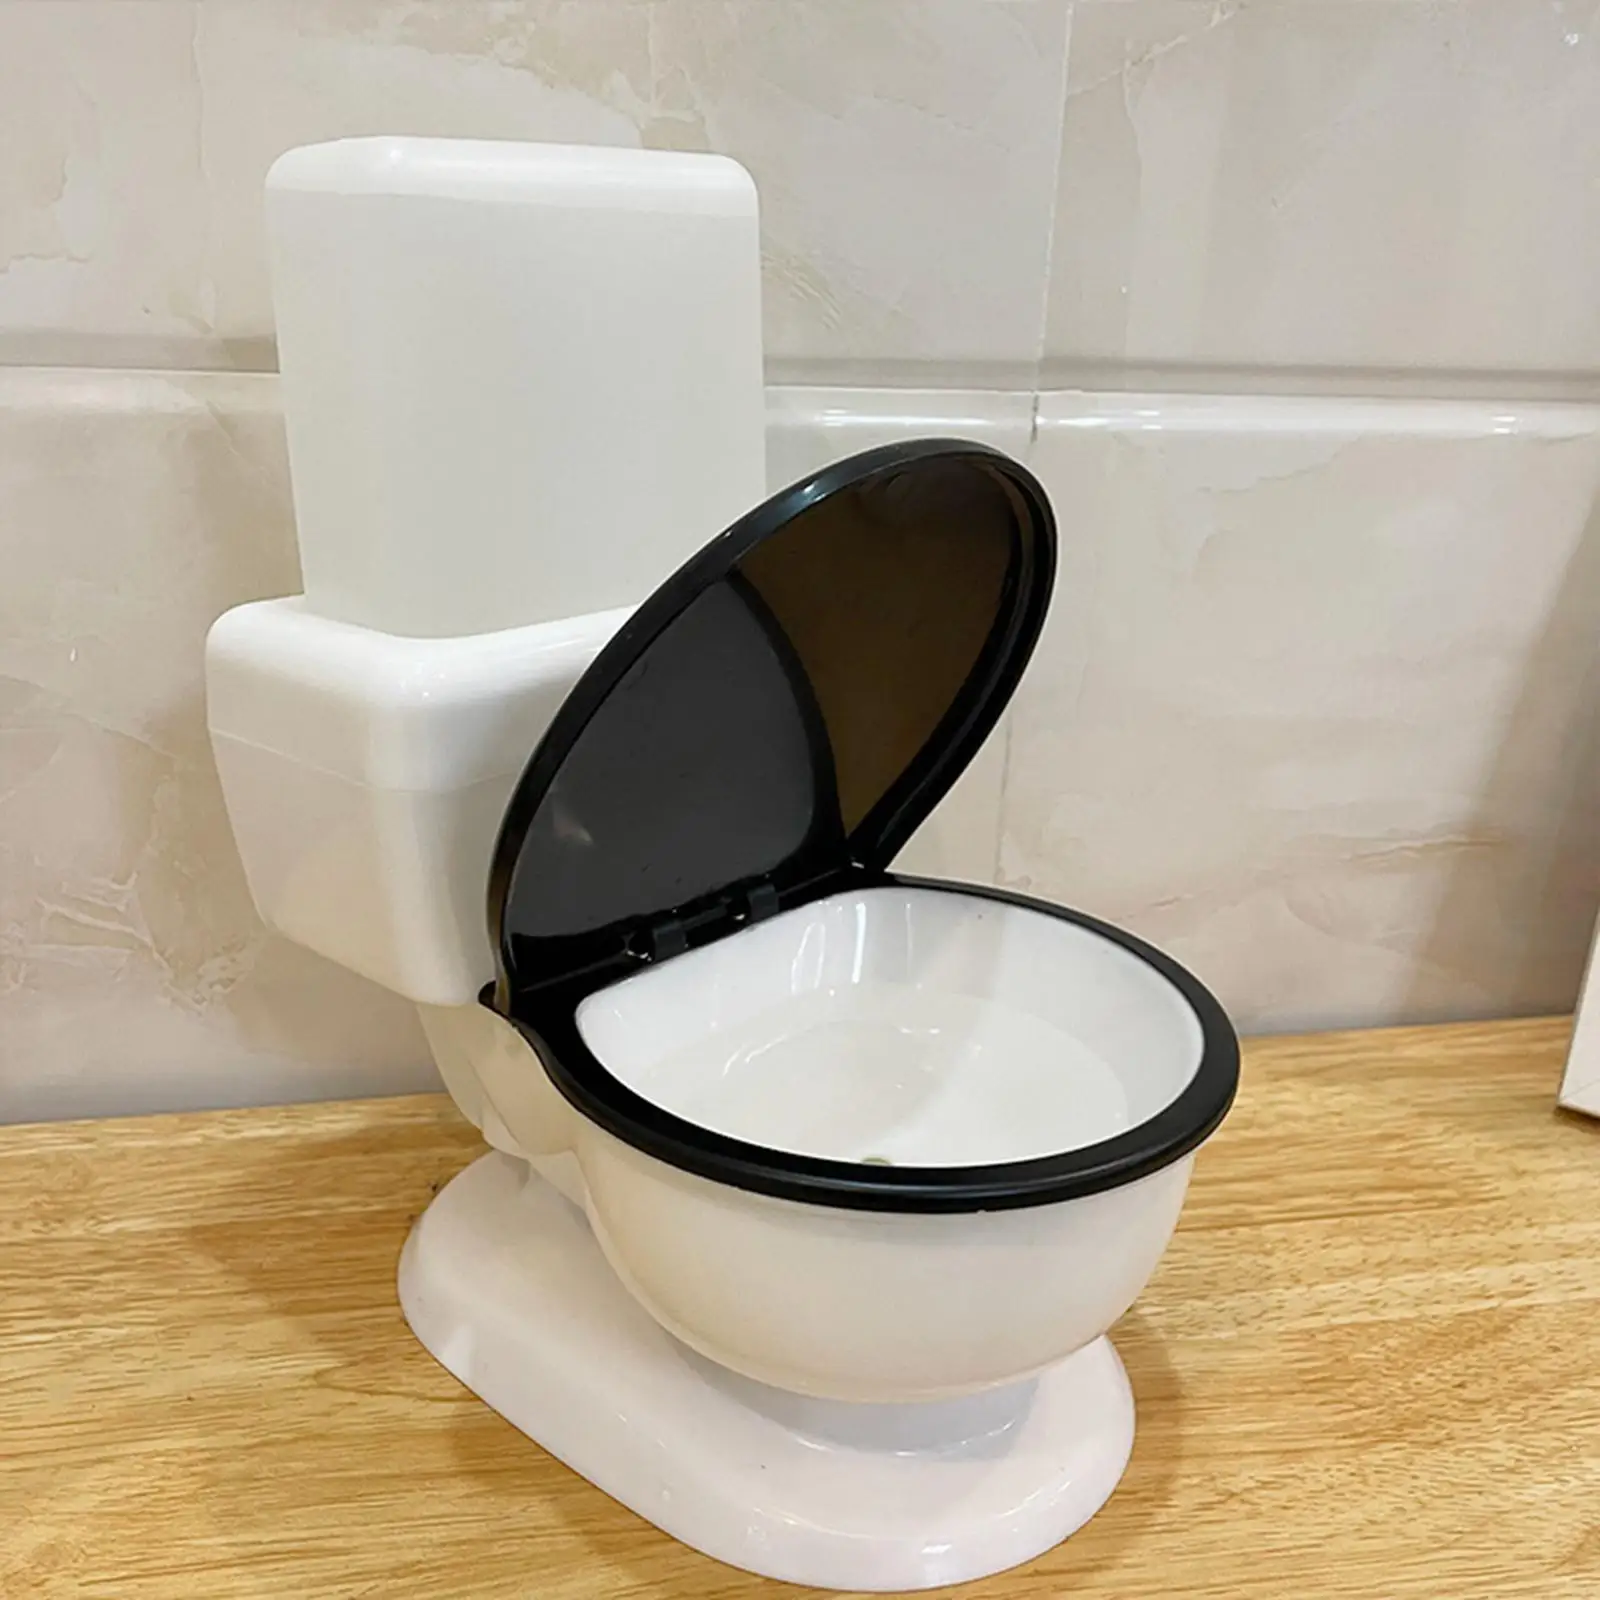 Pet Dog Cat Waterer Water Bowl Gravity Feeder Funny Toilet Shape Detachable Automatic Water Drinking Dispenser Water Fountain